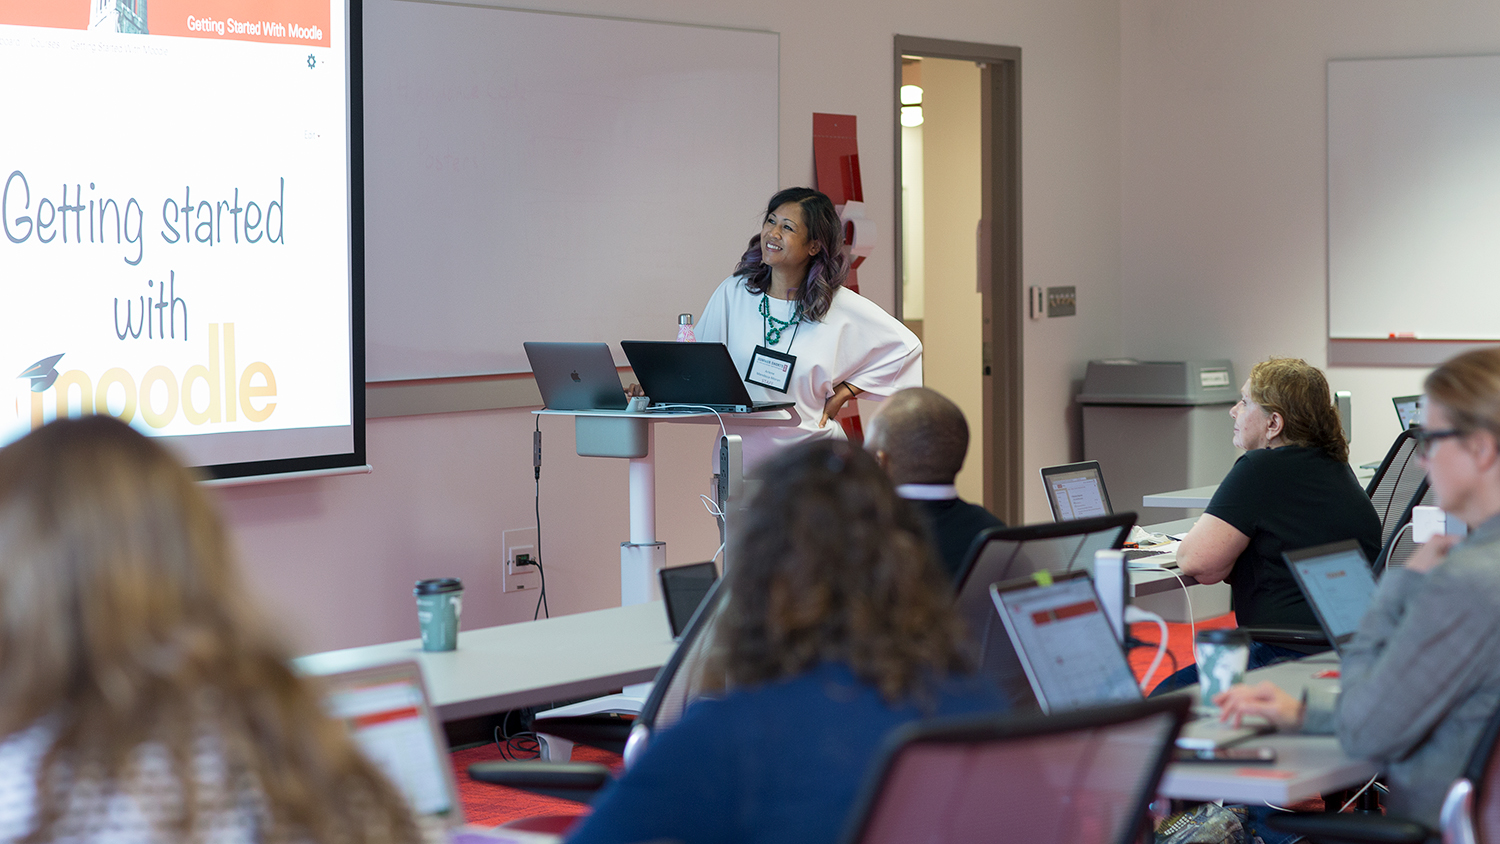 Instructional Technologist Arlene Mendoza-Moran leads a session about Moodle at the 2018 Summer Shorts in Instructional Technologies program. Arlene is at the front of a classroom looking at a screen that says "Getting Started with Moodle" participants are sitting at tables and also looking at the screen